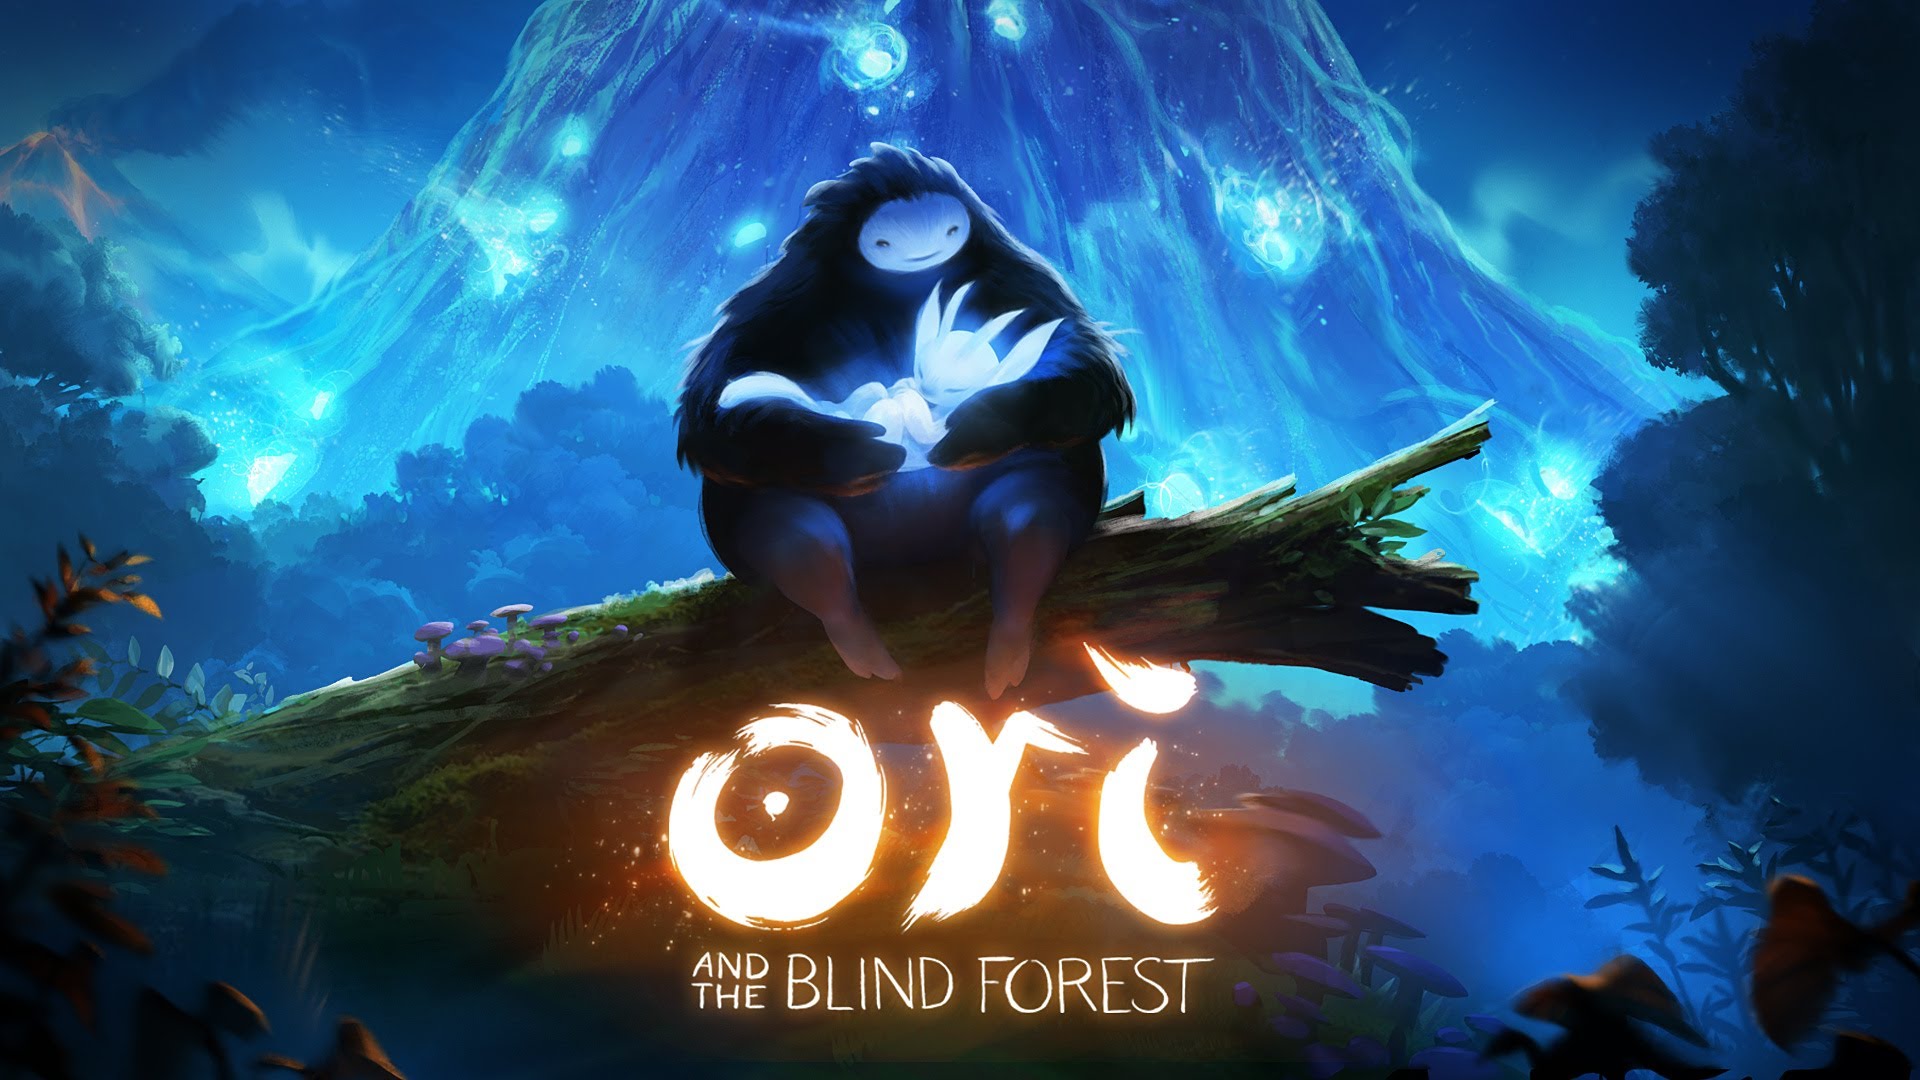 High Resolution Wallpaper | Ori And The Blind Forest 1920x1080 px